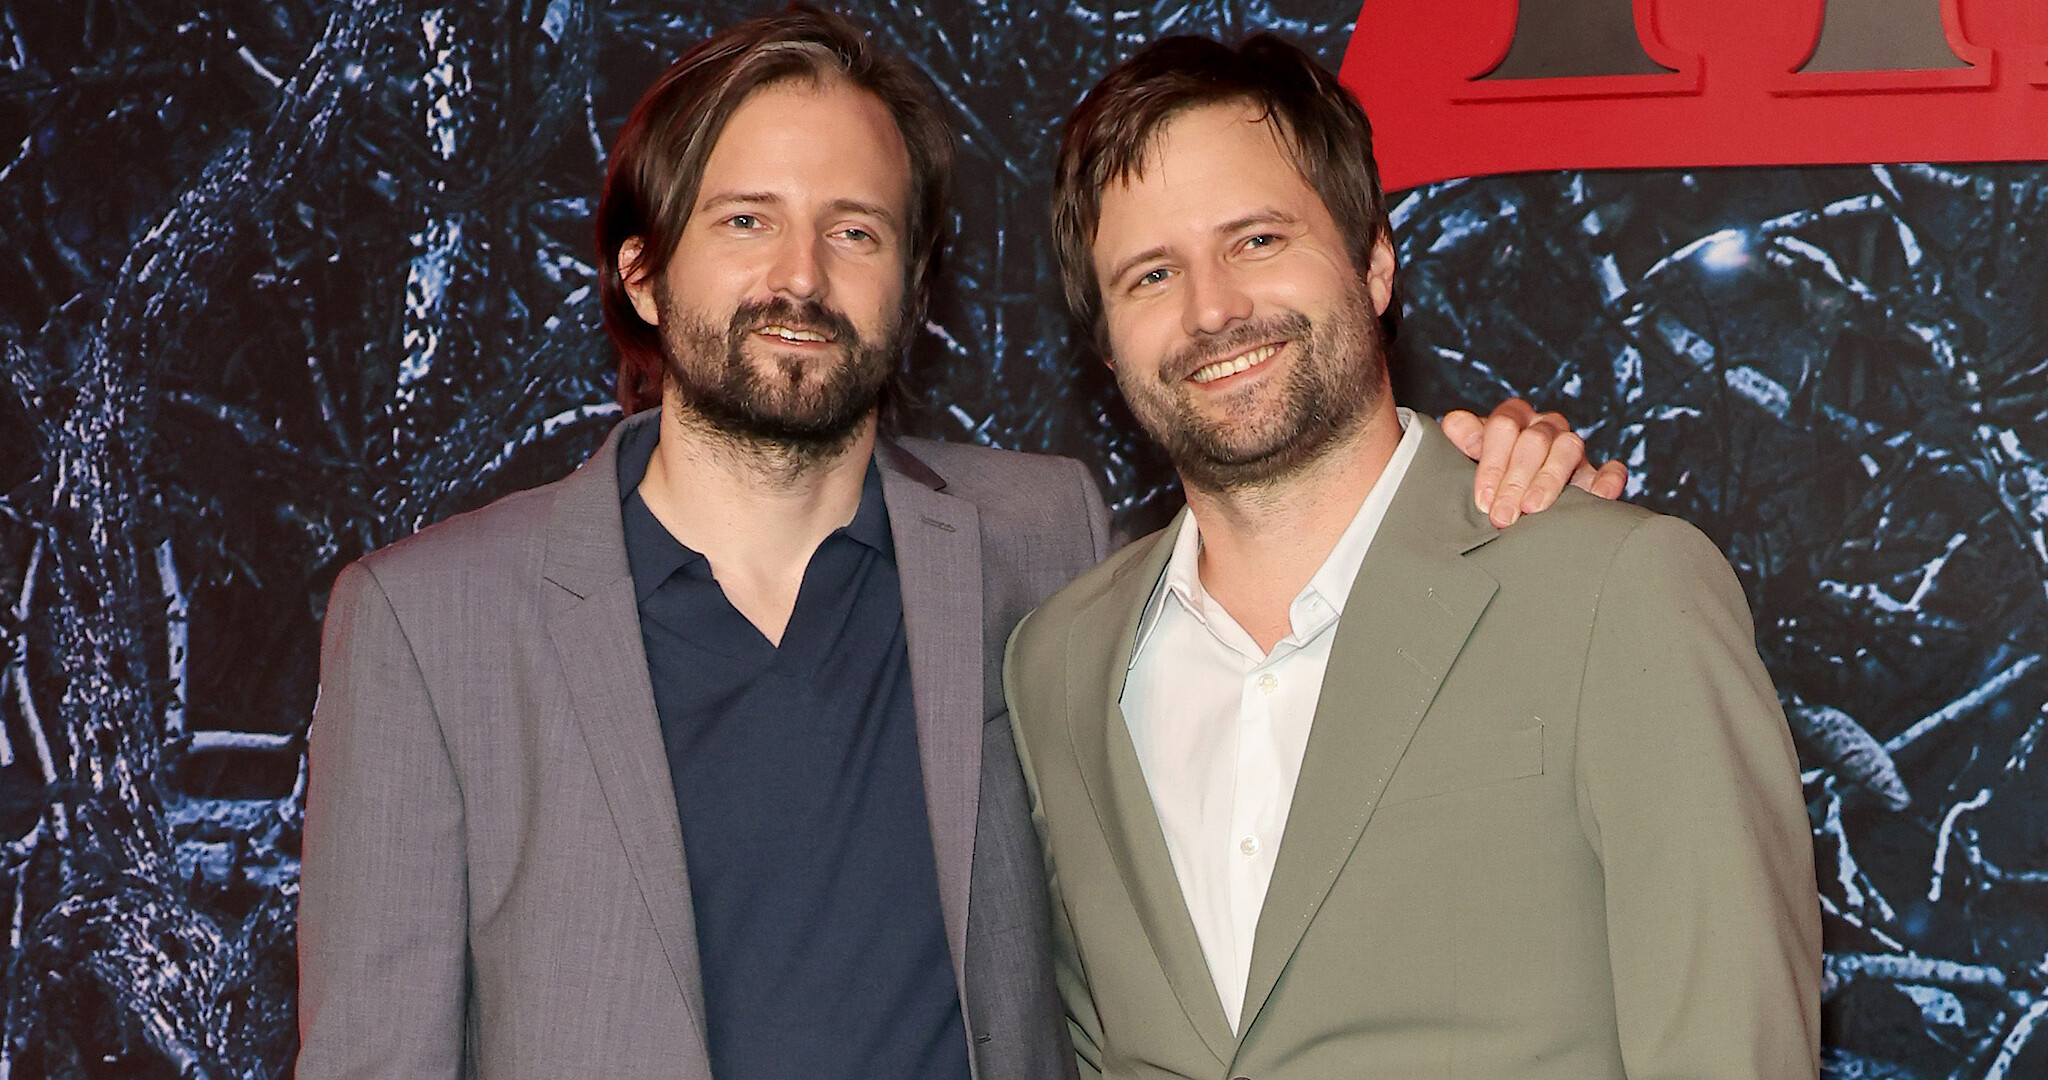 Stranger Things Season 5 news: Duffer Brothers reveal Title of Episode 1, Check release date, latest updates